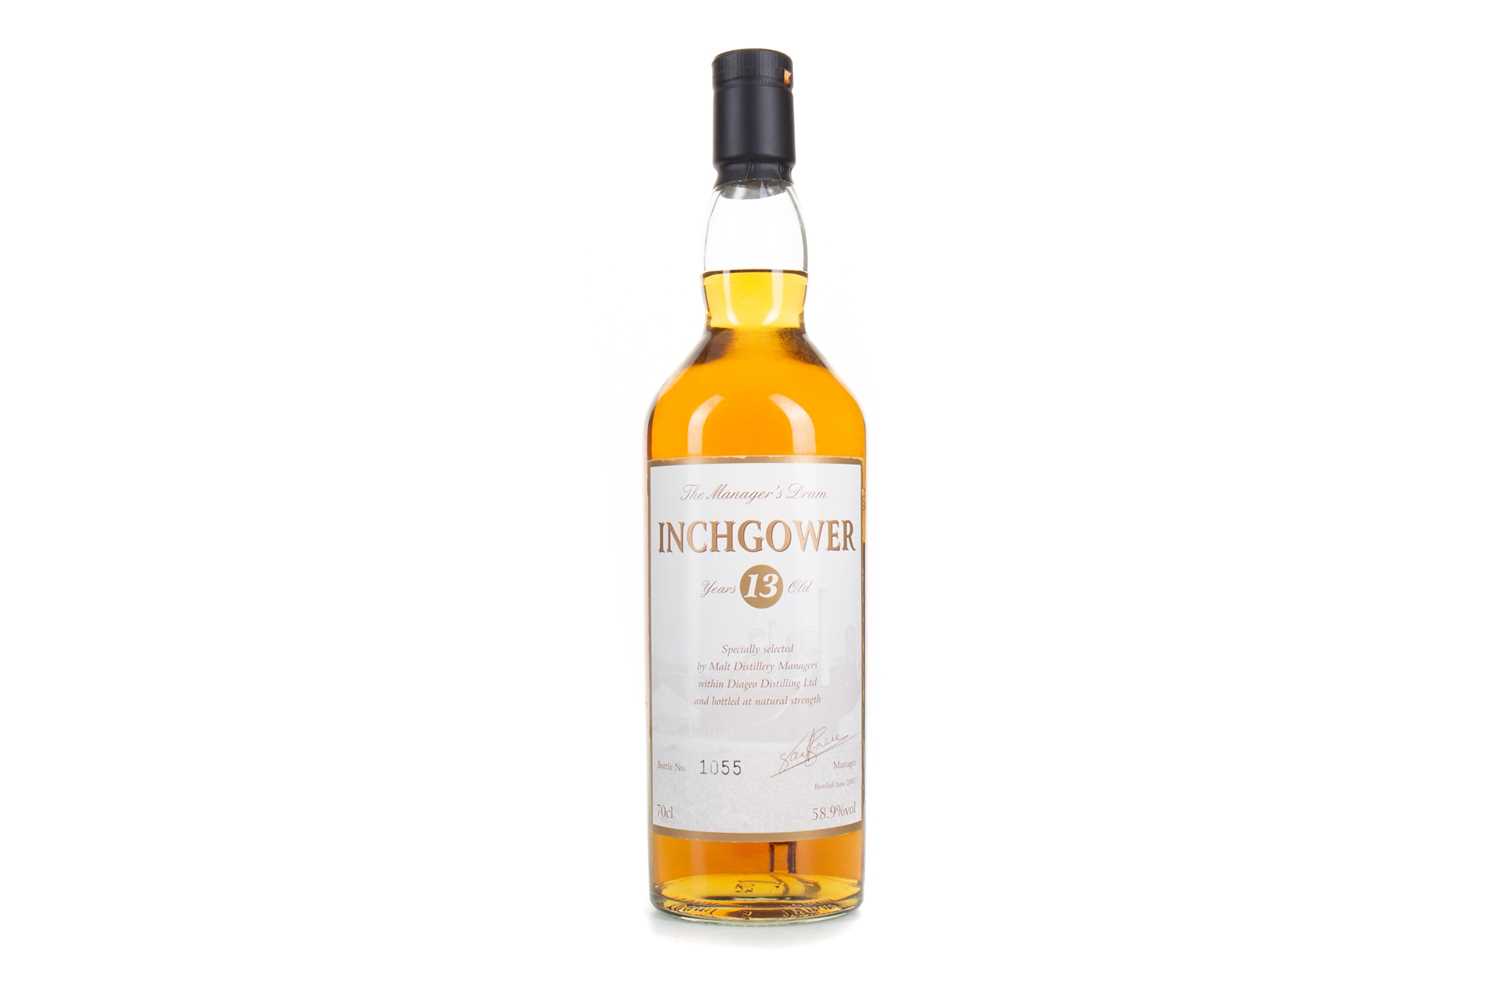 Lot 180 - INCHGOWER 13 YEAR OLD MANAGER'S DRAM 2007 RELEASE